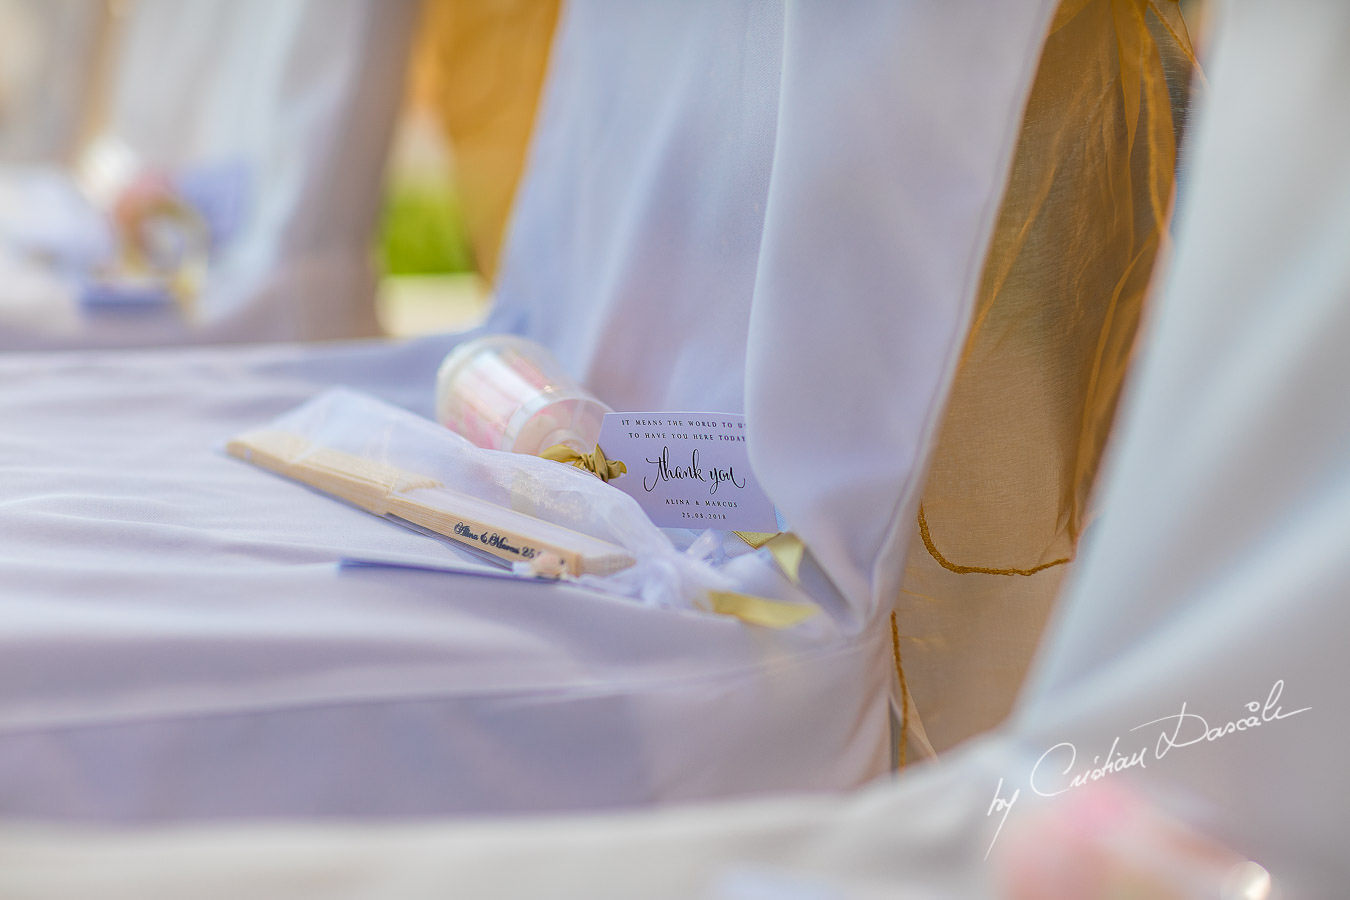 Exquisite Wedding at Asterias Beach Hotel. Photography by Cyprus Photographer Cristian Dascalu.